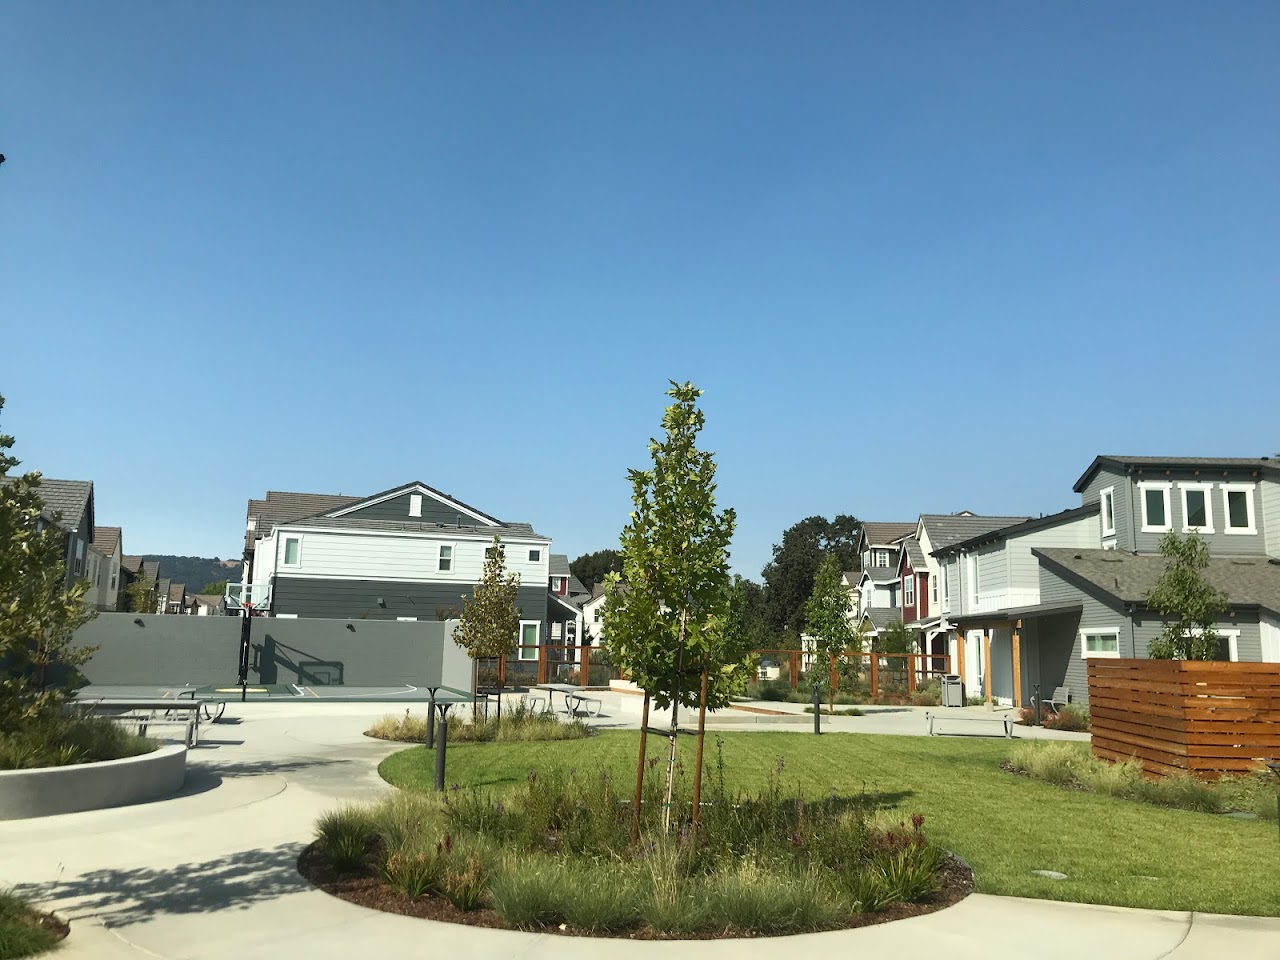 Photo of SUNFLOWER HILL AT IRBY RANCH. Affordable housing located at 3701 NEVADA STREET PLEASANTON, CA 94566